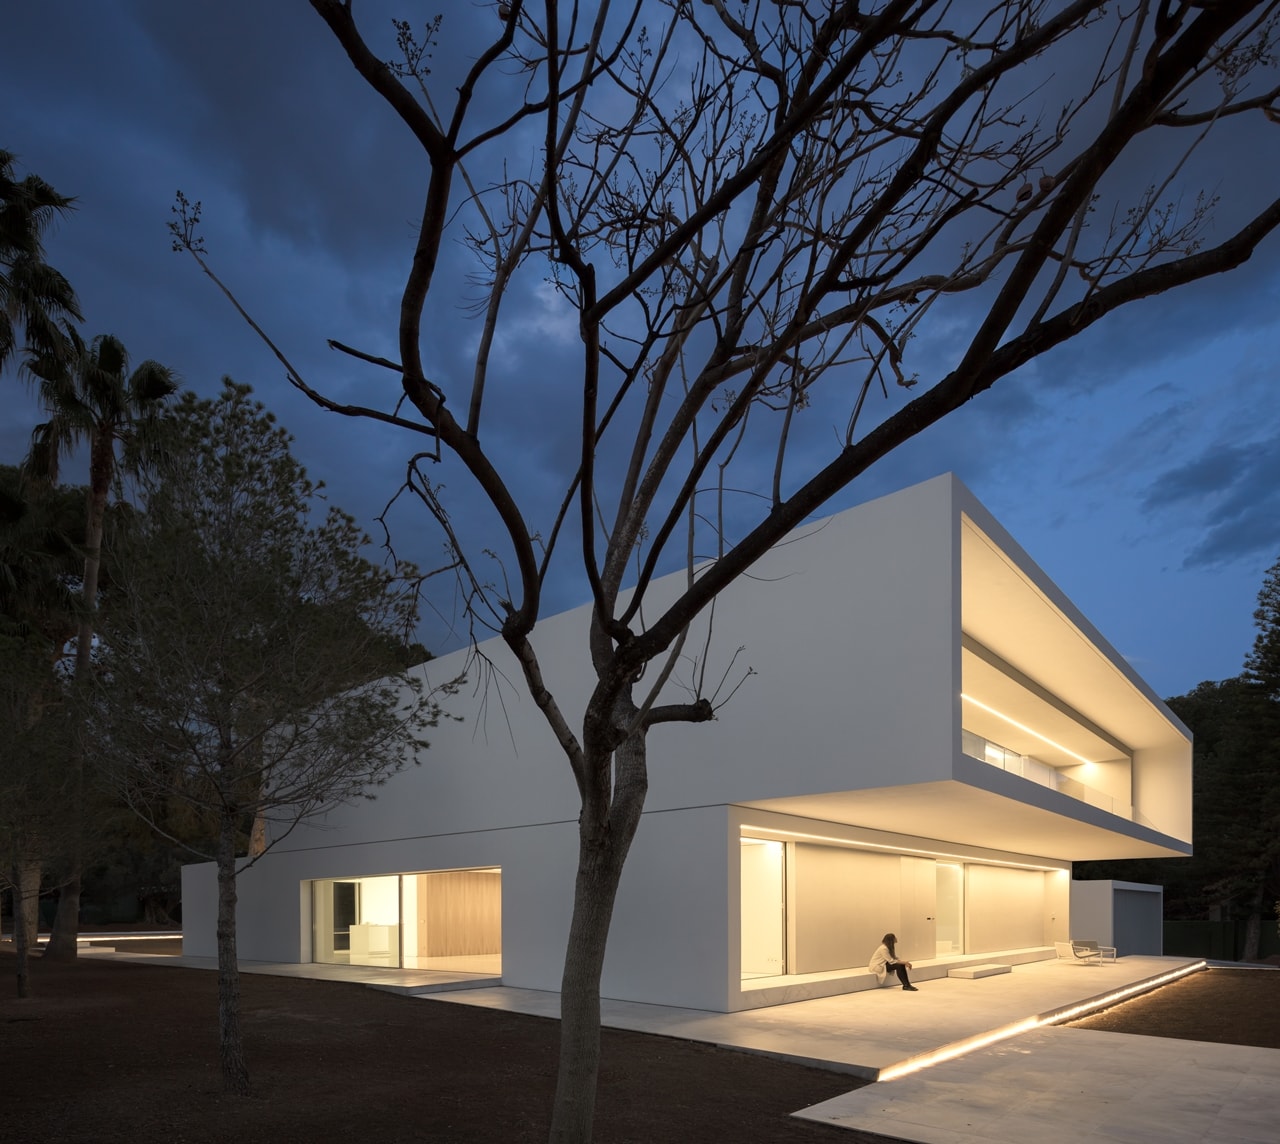 Exterior design of minimalist house designed by Fran Silvestre Architects